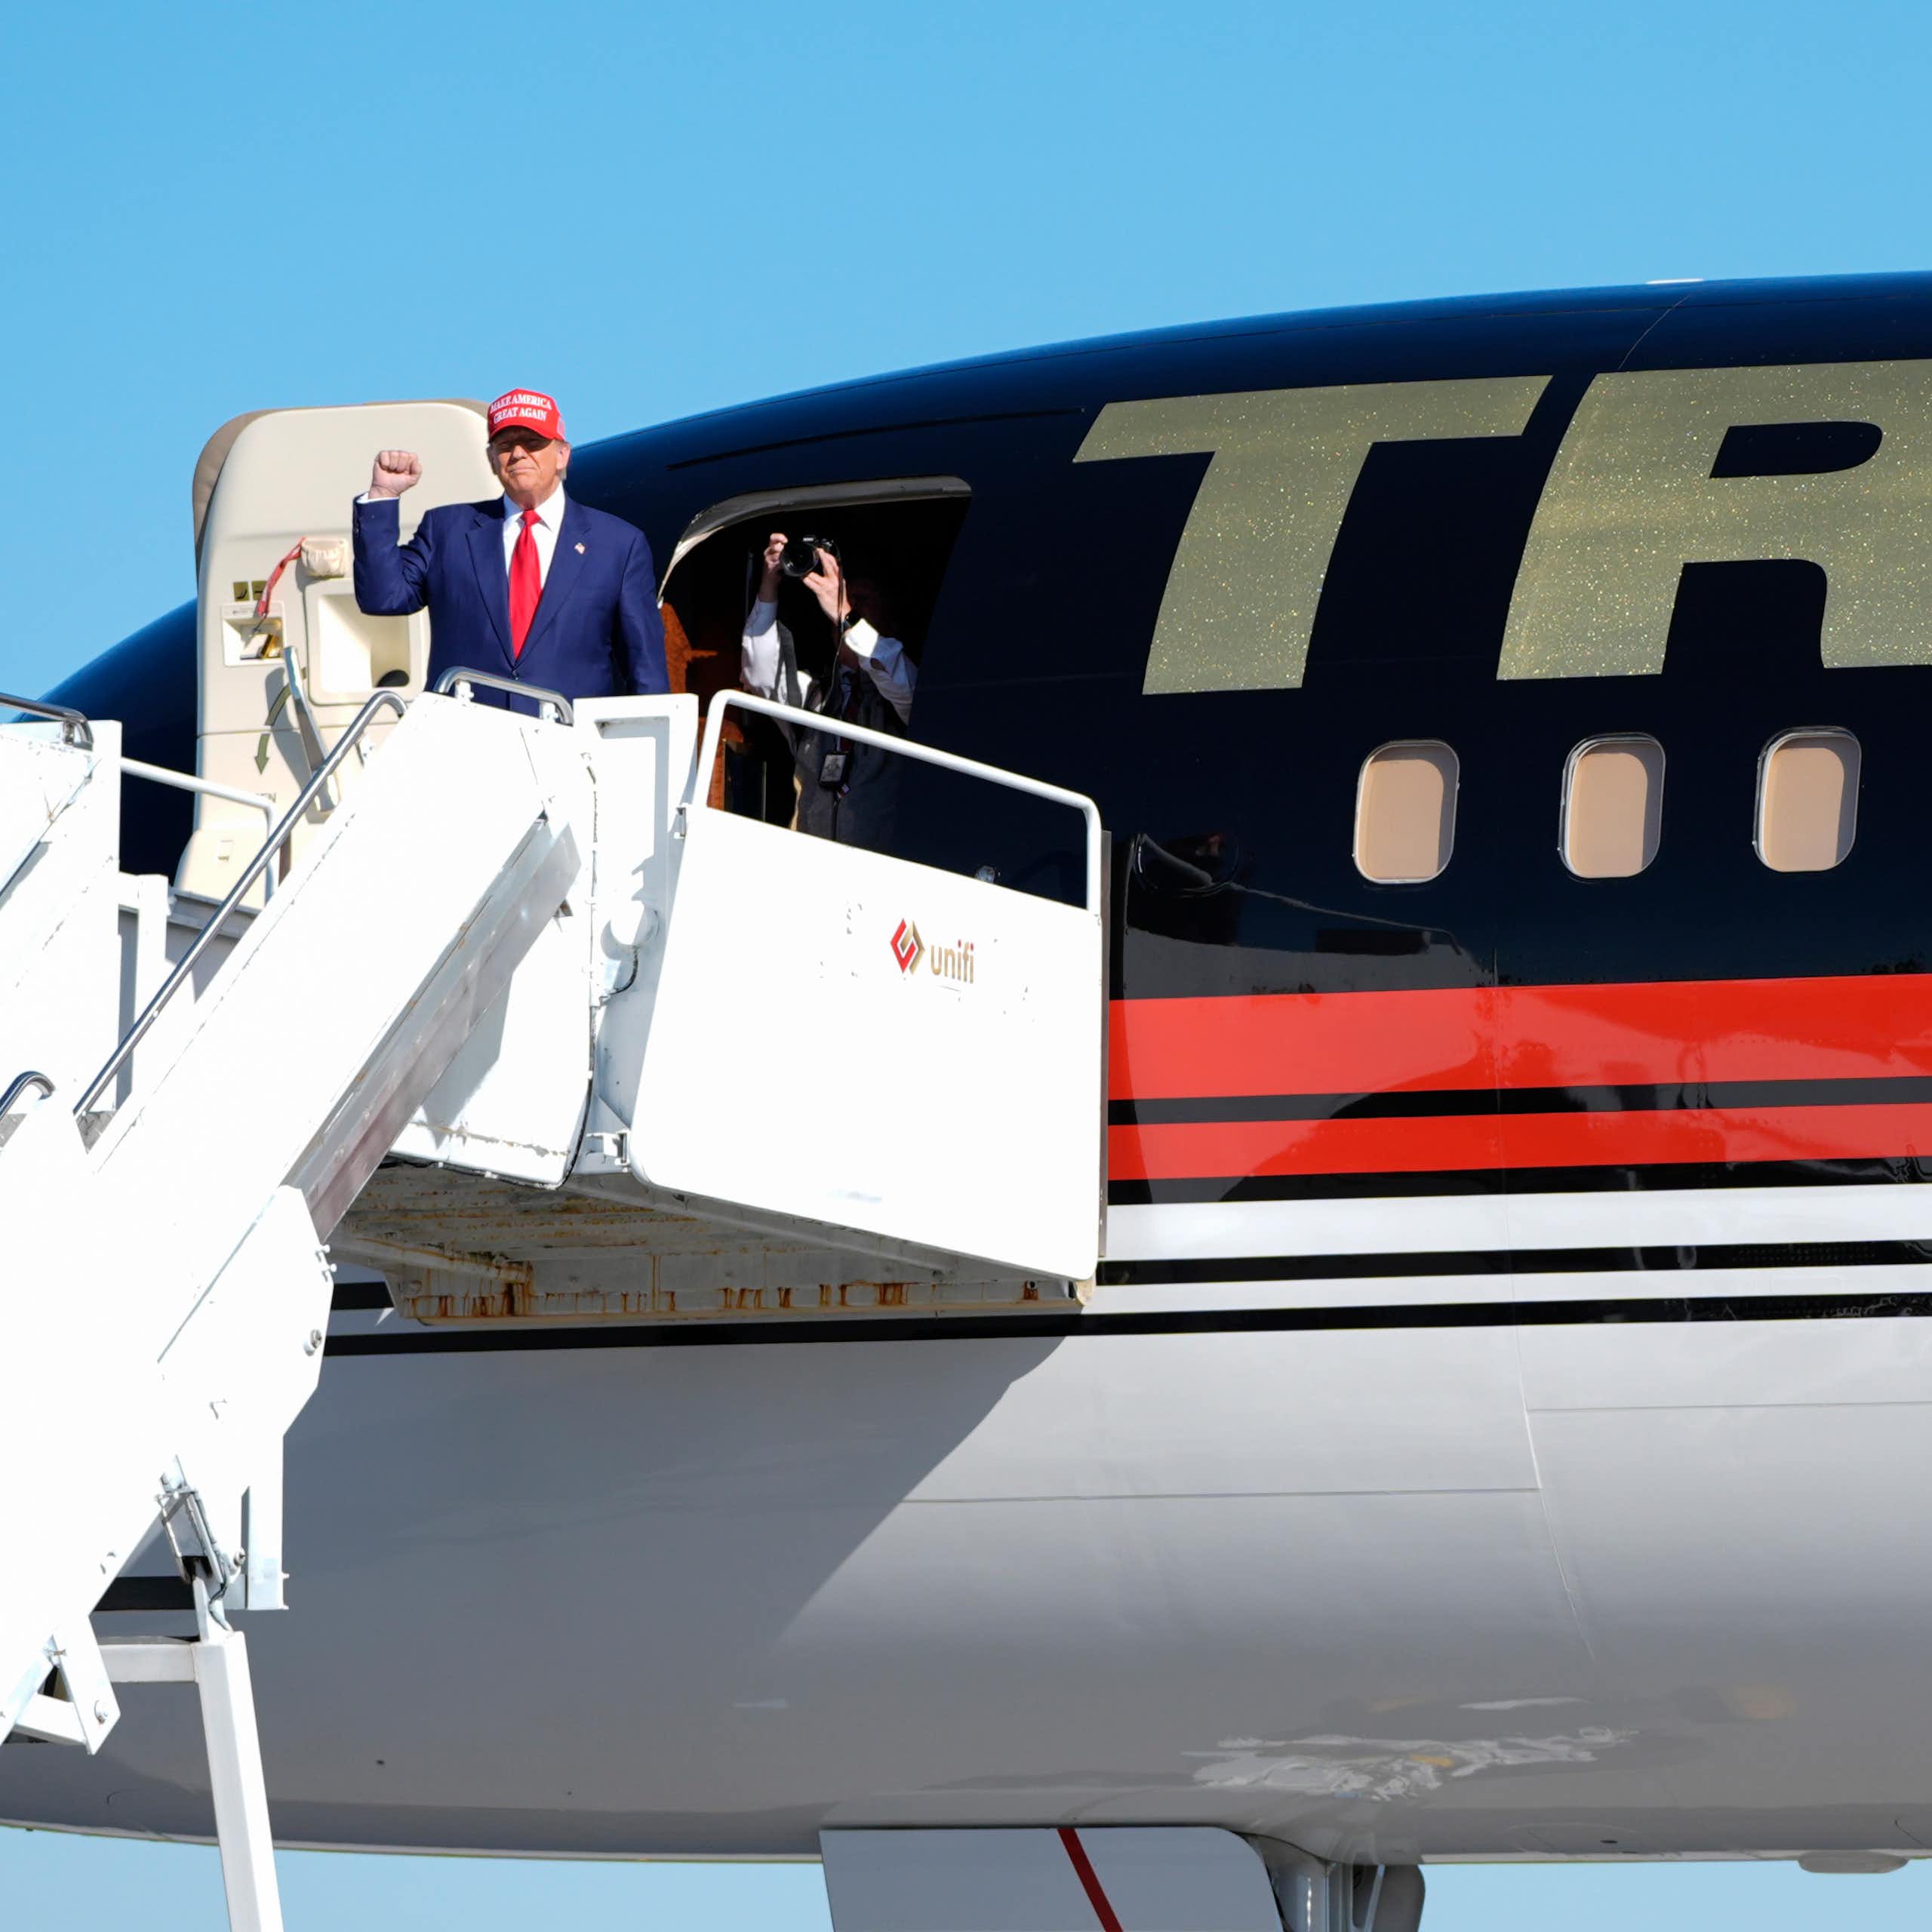 A man in a blue suit wearing a red ball cap raises his fist while disembarking from a plane that as a large Trump on its fuselage.